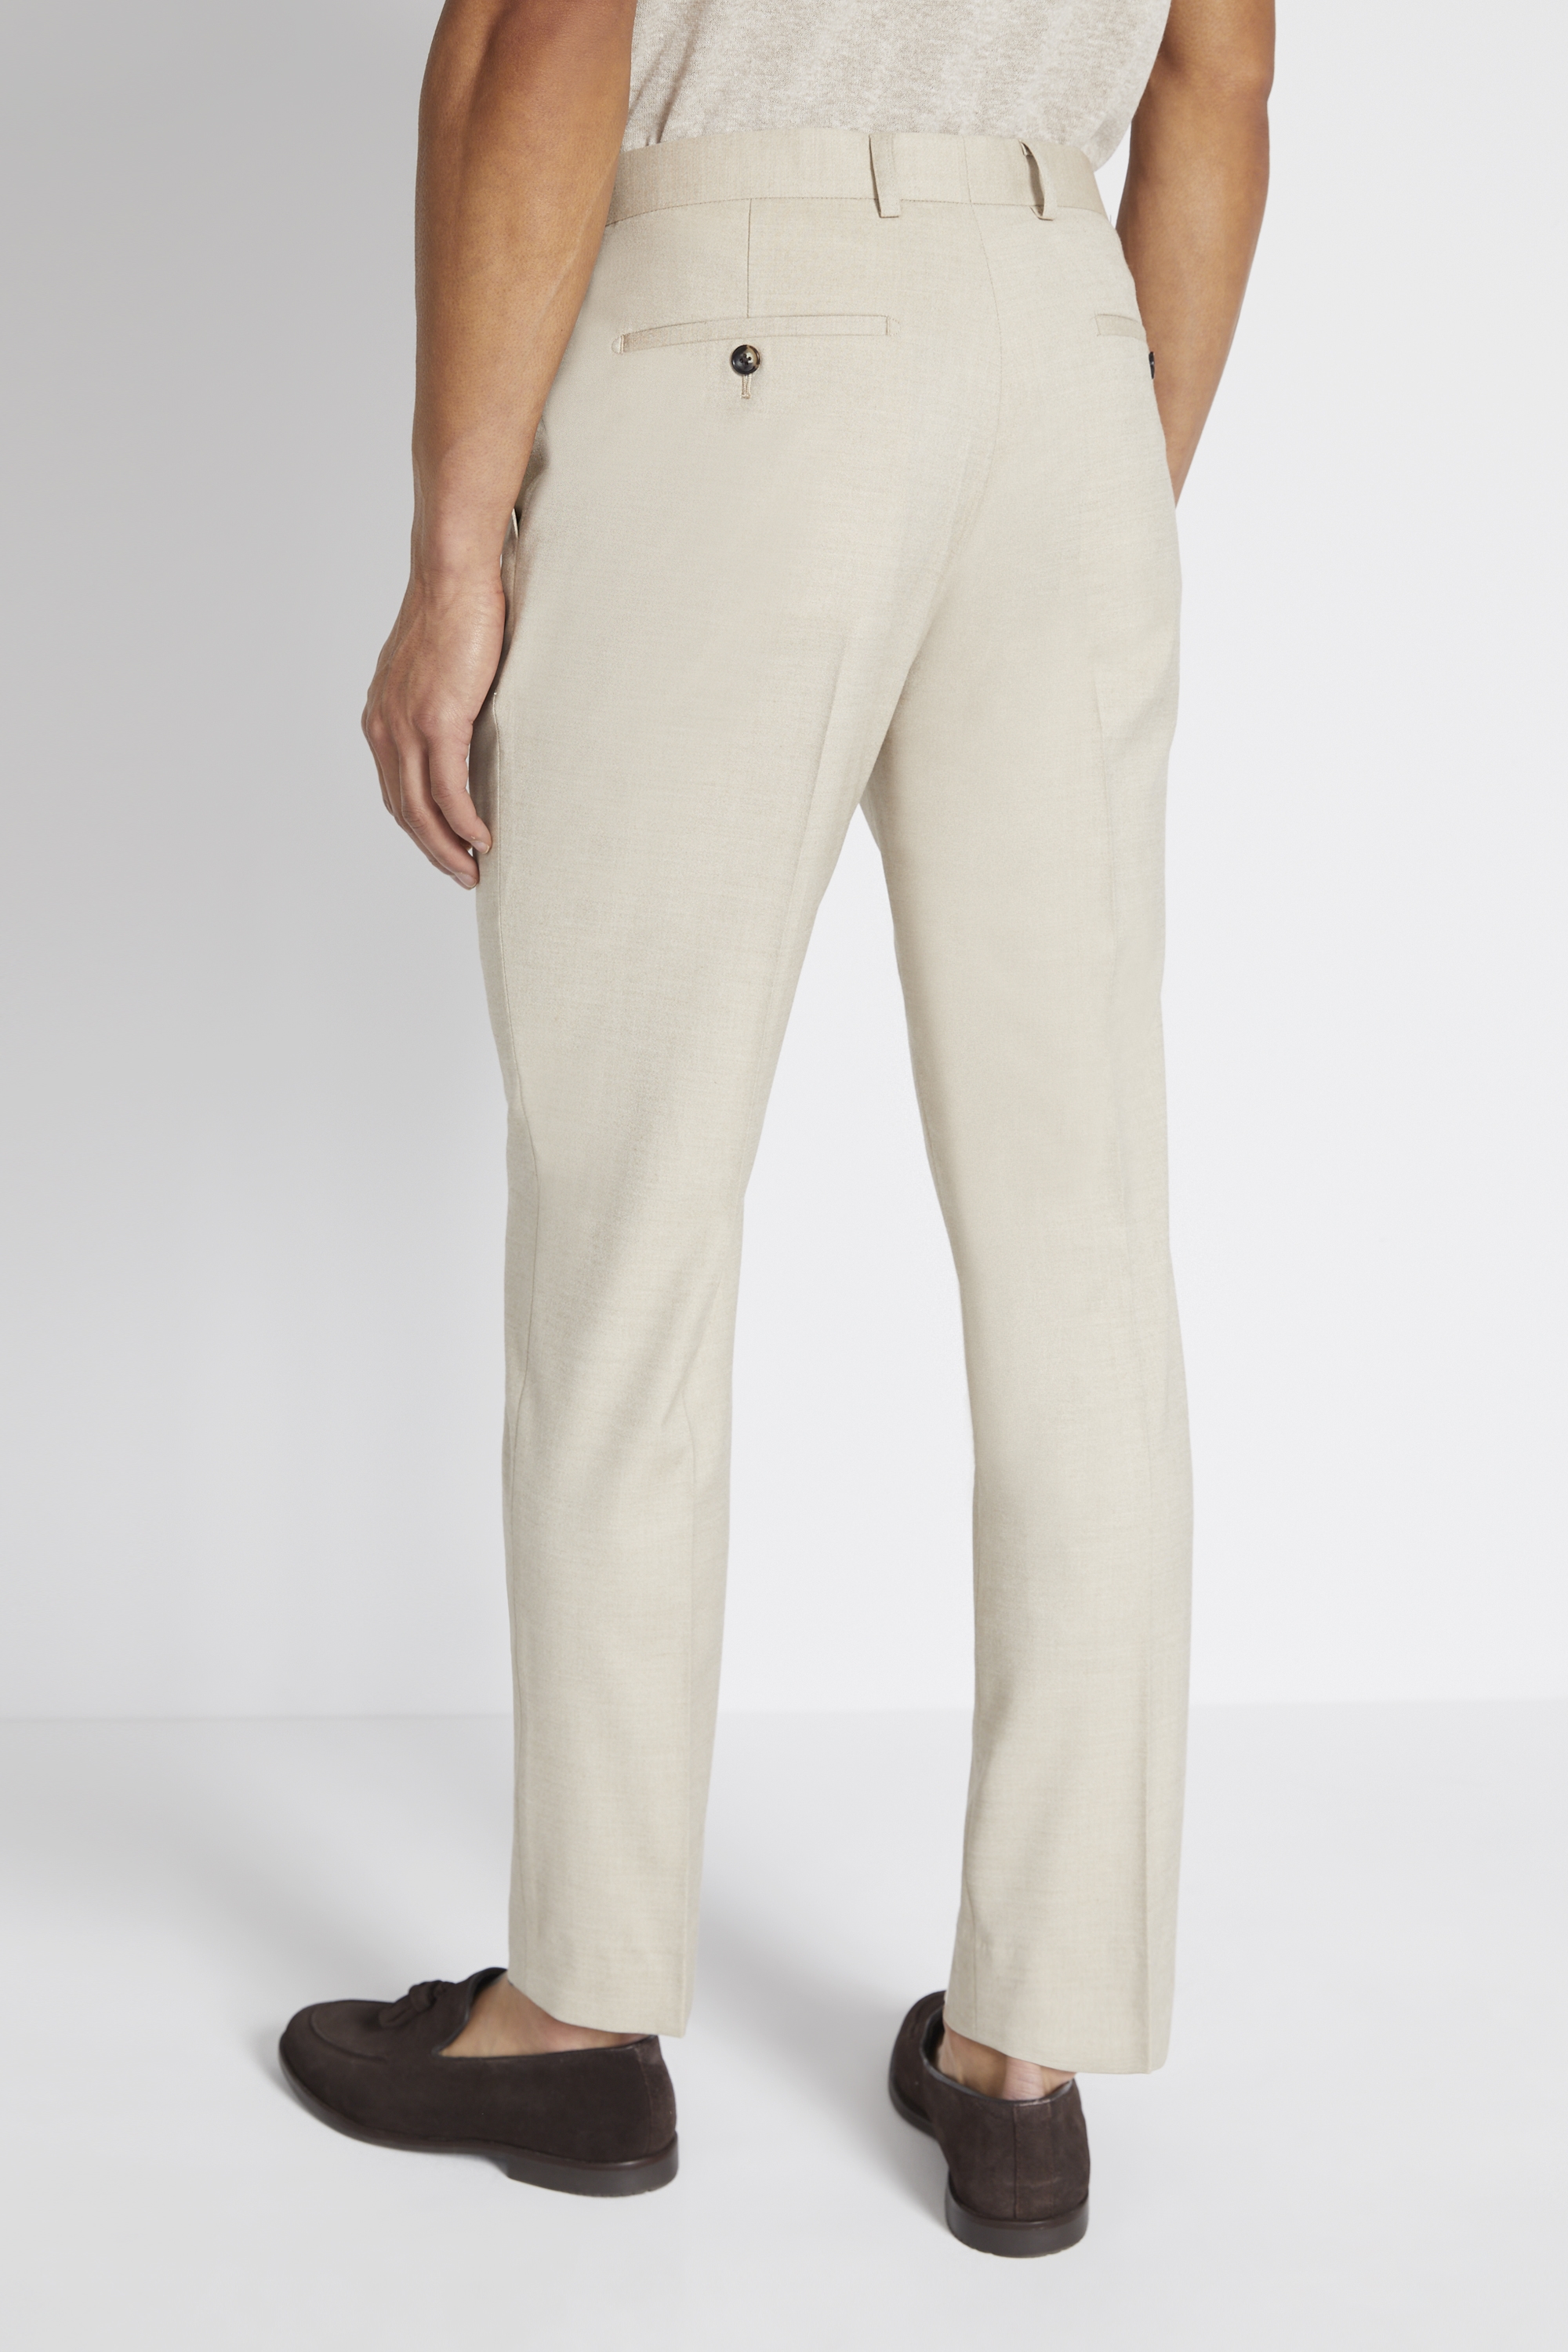 Slim Fit Latte Trousers | Buy Online at Moss